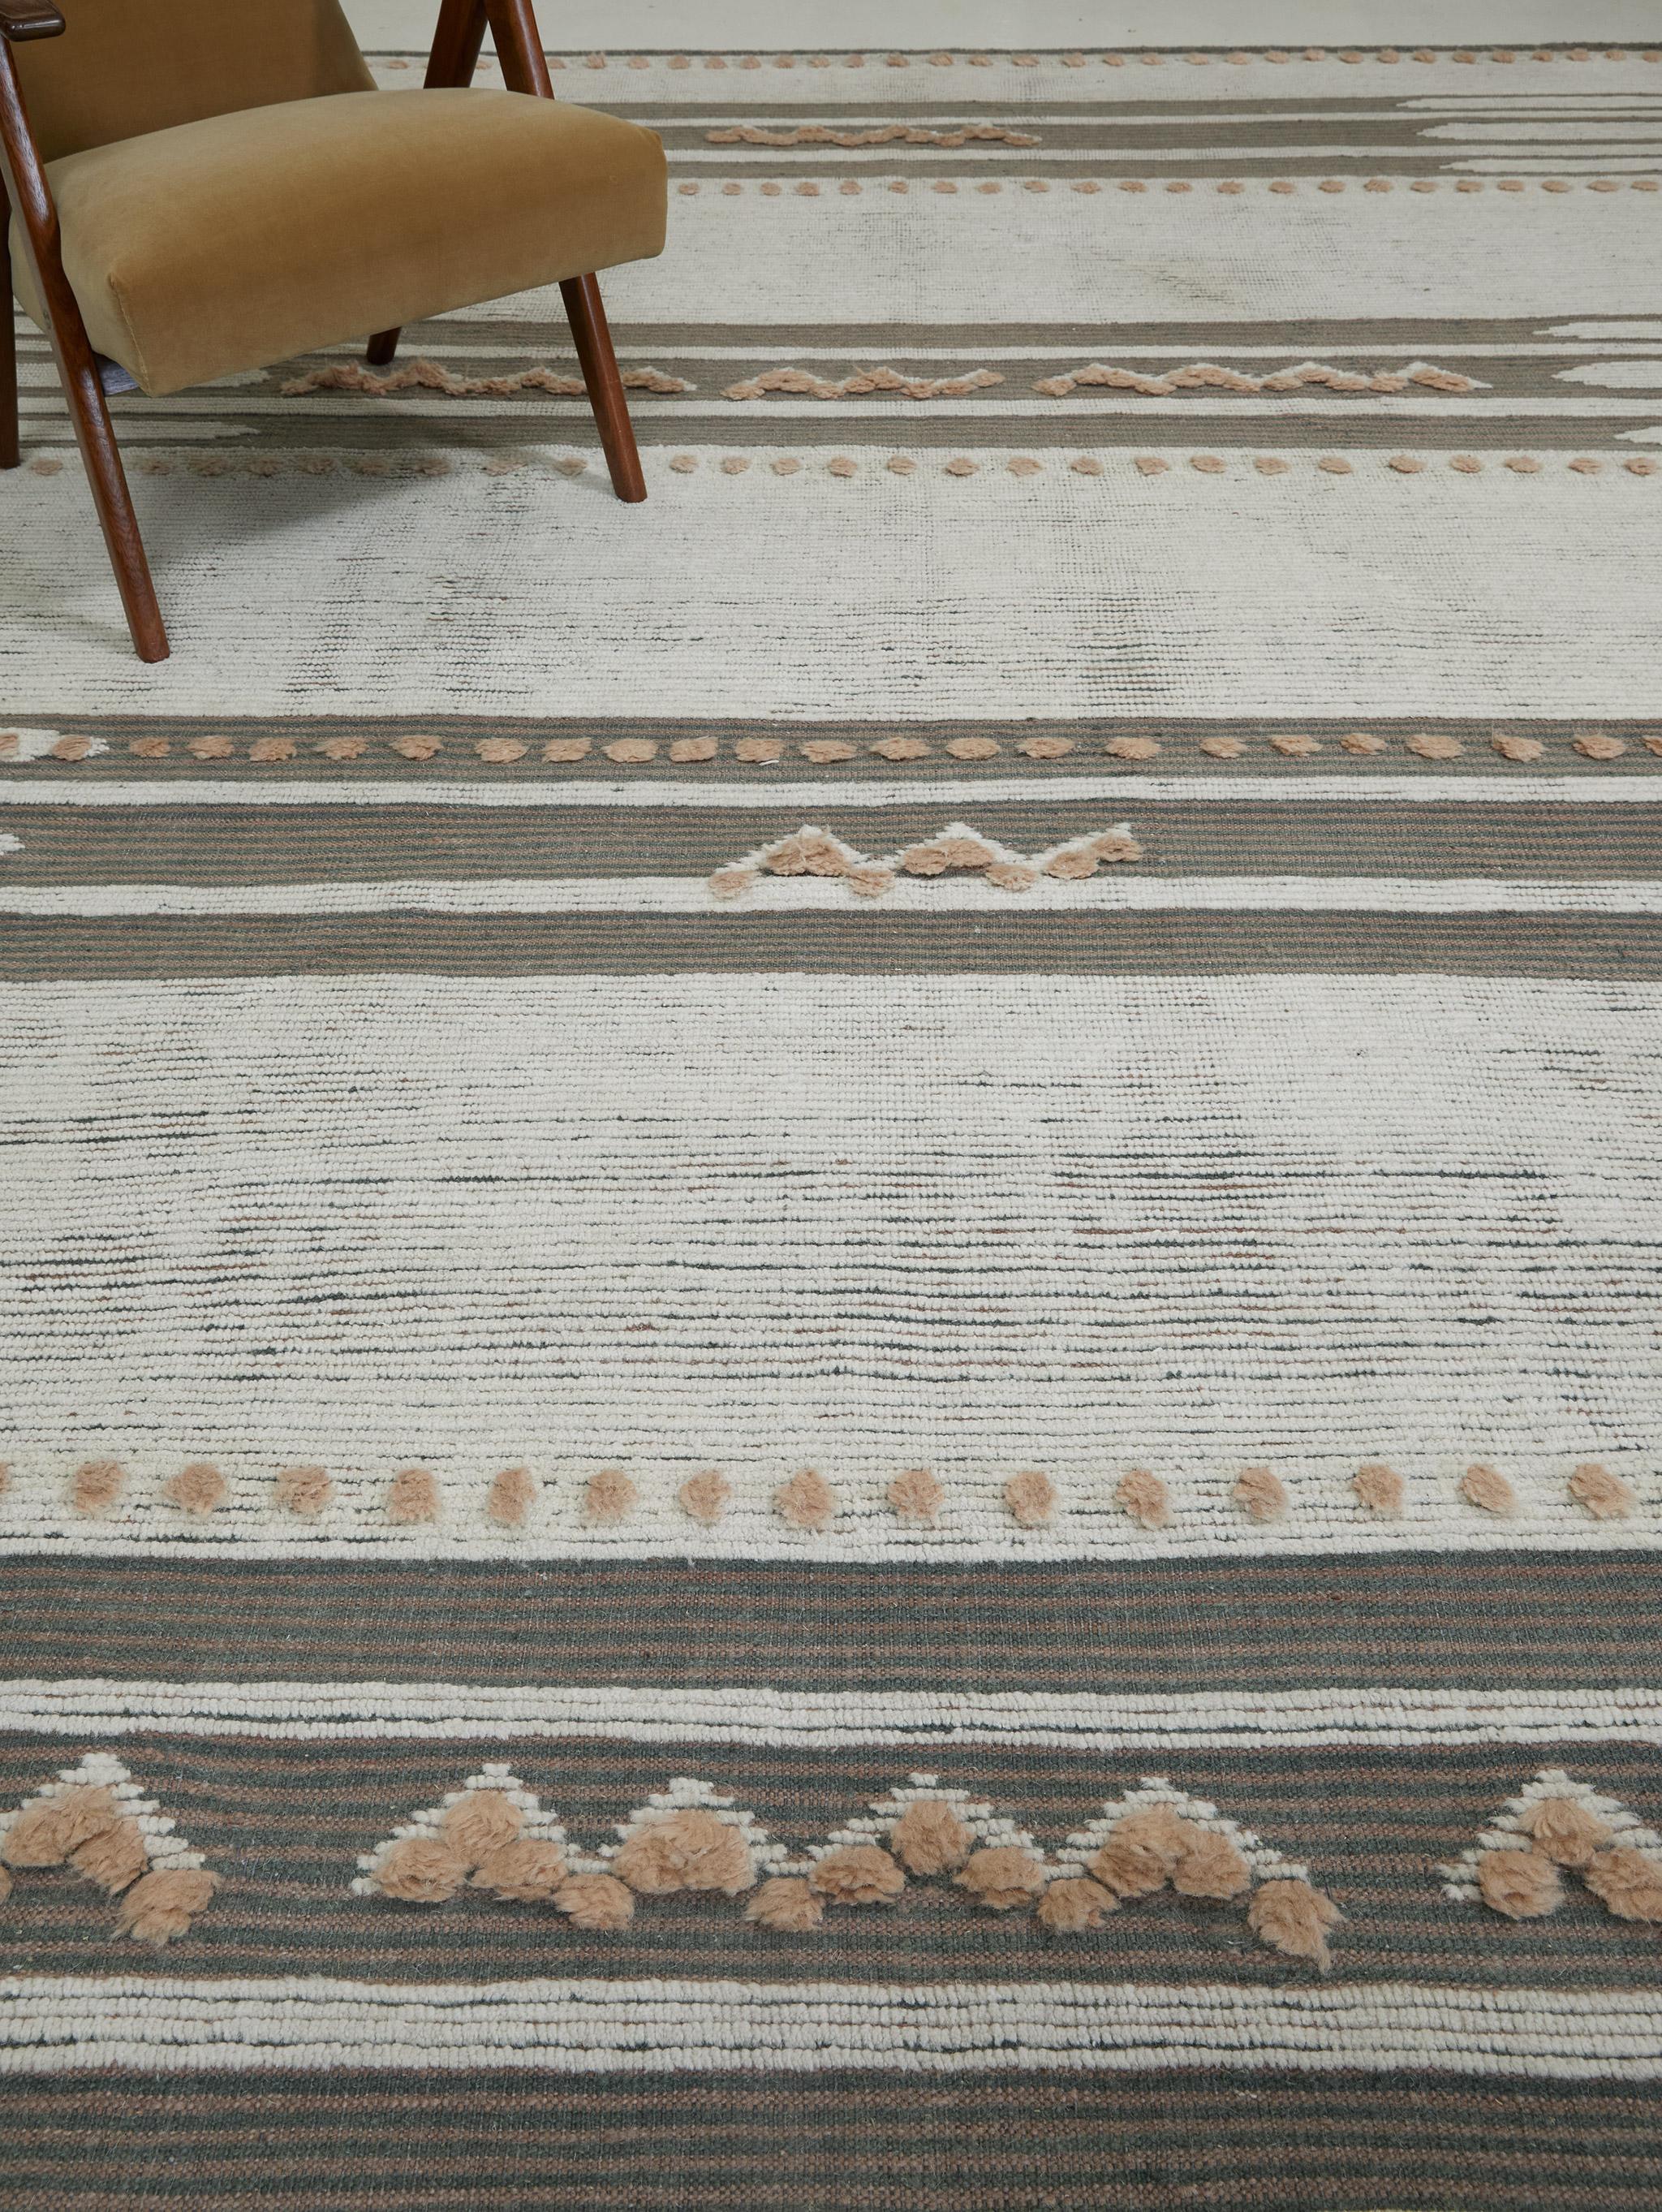 Composed of horizontal bands with revealed flatweave, Barbera brings the fun with tactile accent poofs and a few zigzags. Here in understated teal with taupe, ivory and some delicate rose. The Estancia Collection by Mehraban is a group of casually